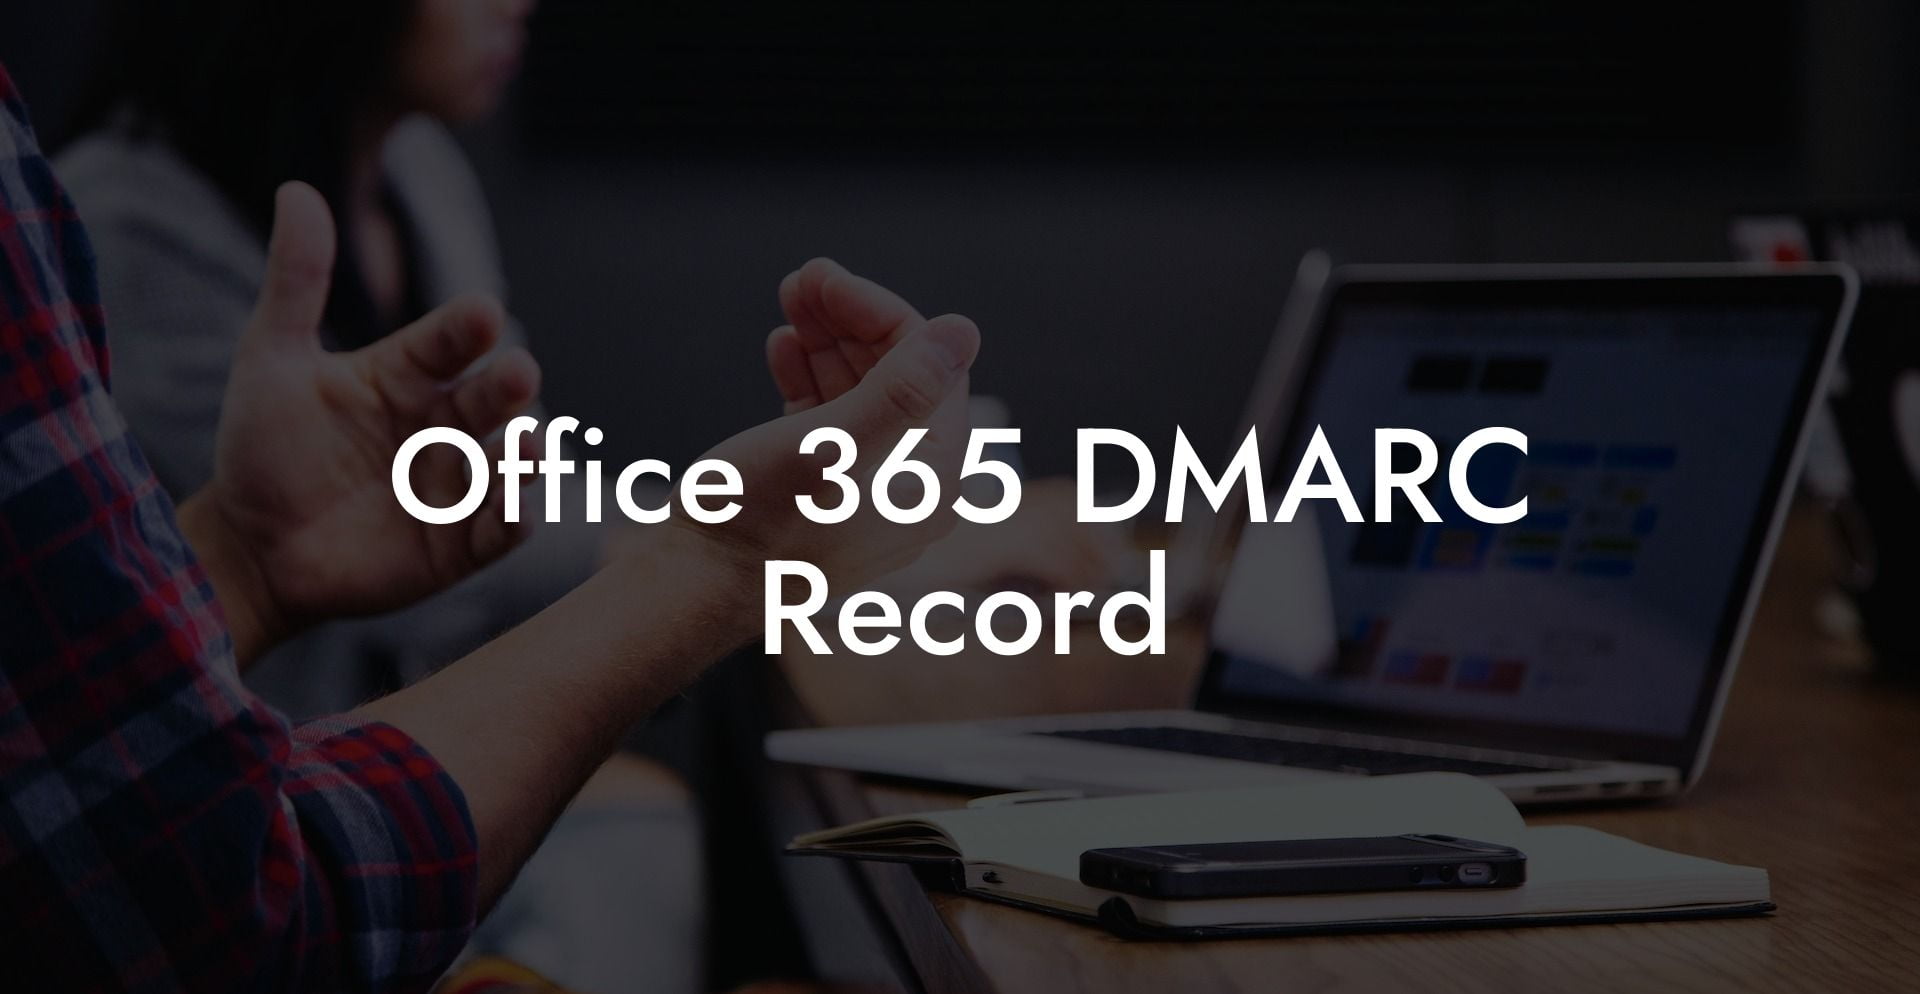 Office 365 DMARC Record